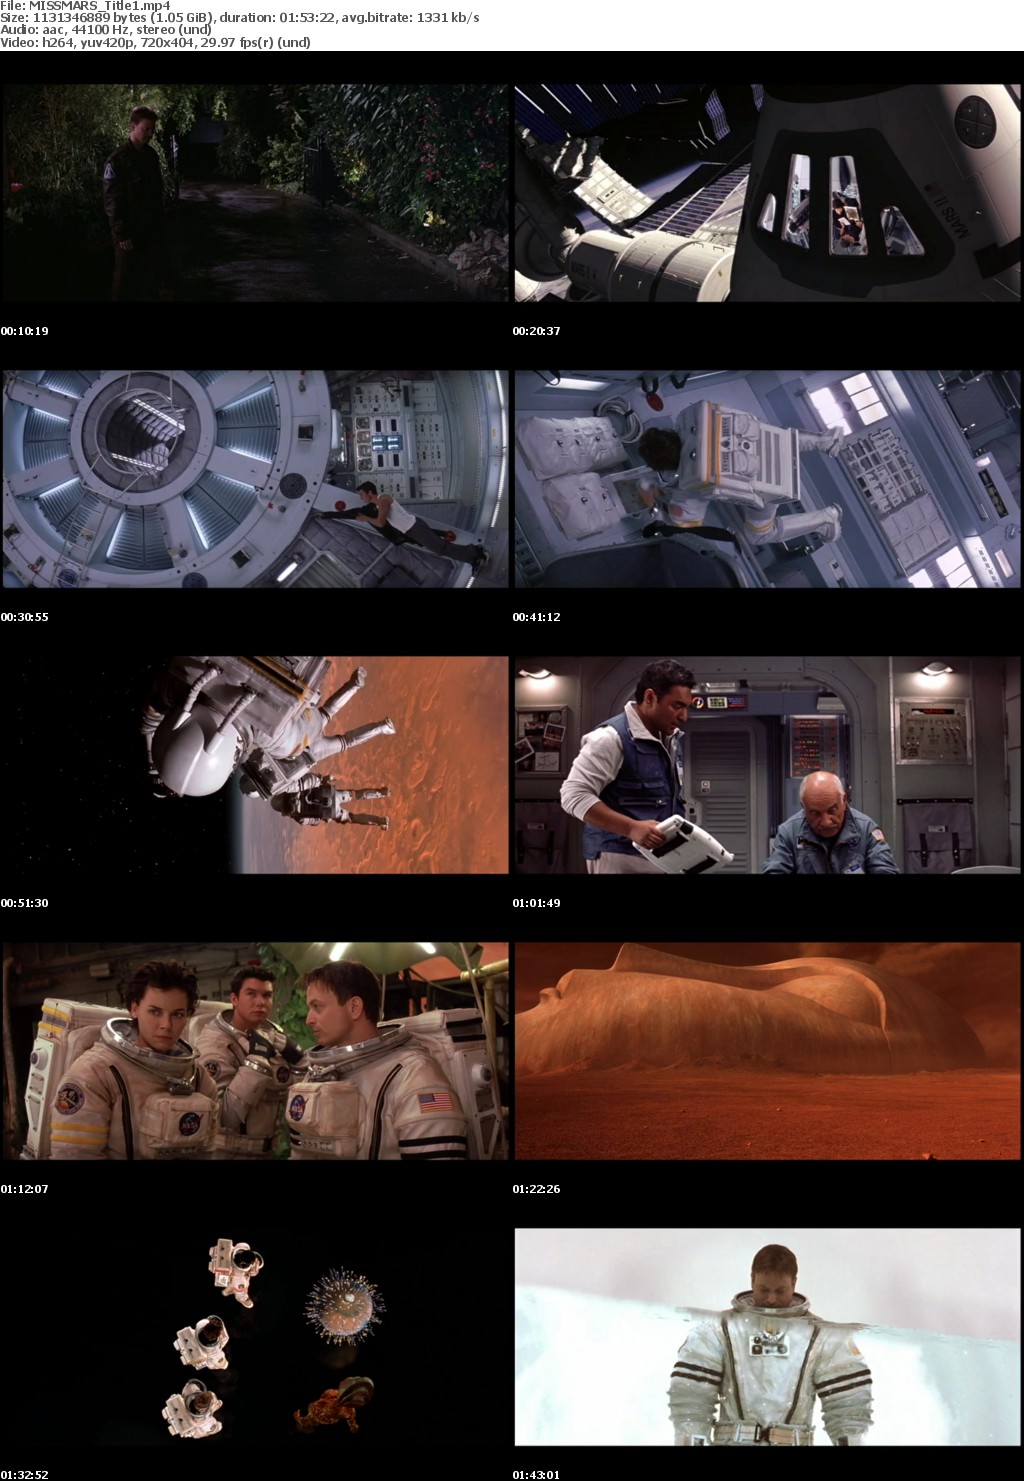 Mission to Mars (2000)Mp-4 X264 Dvd-Rip 480p AACDSD